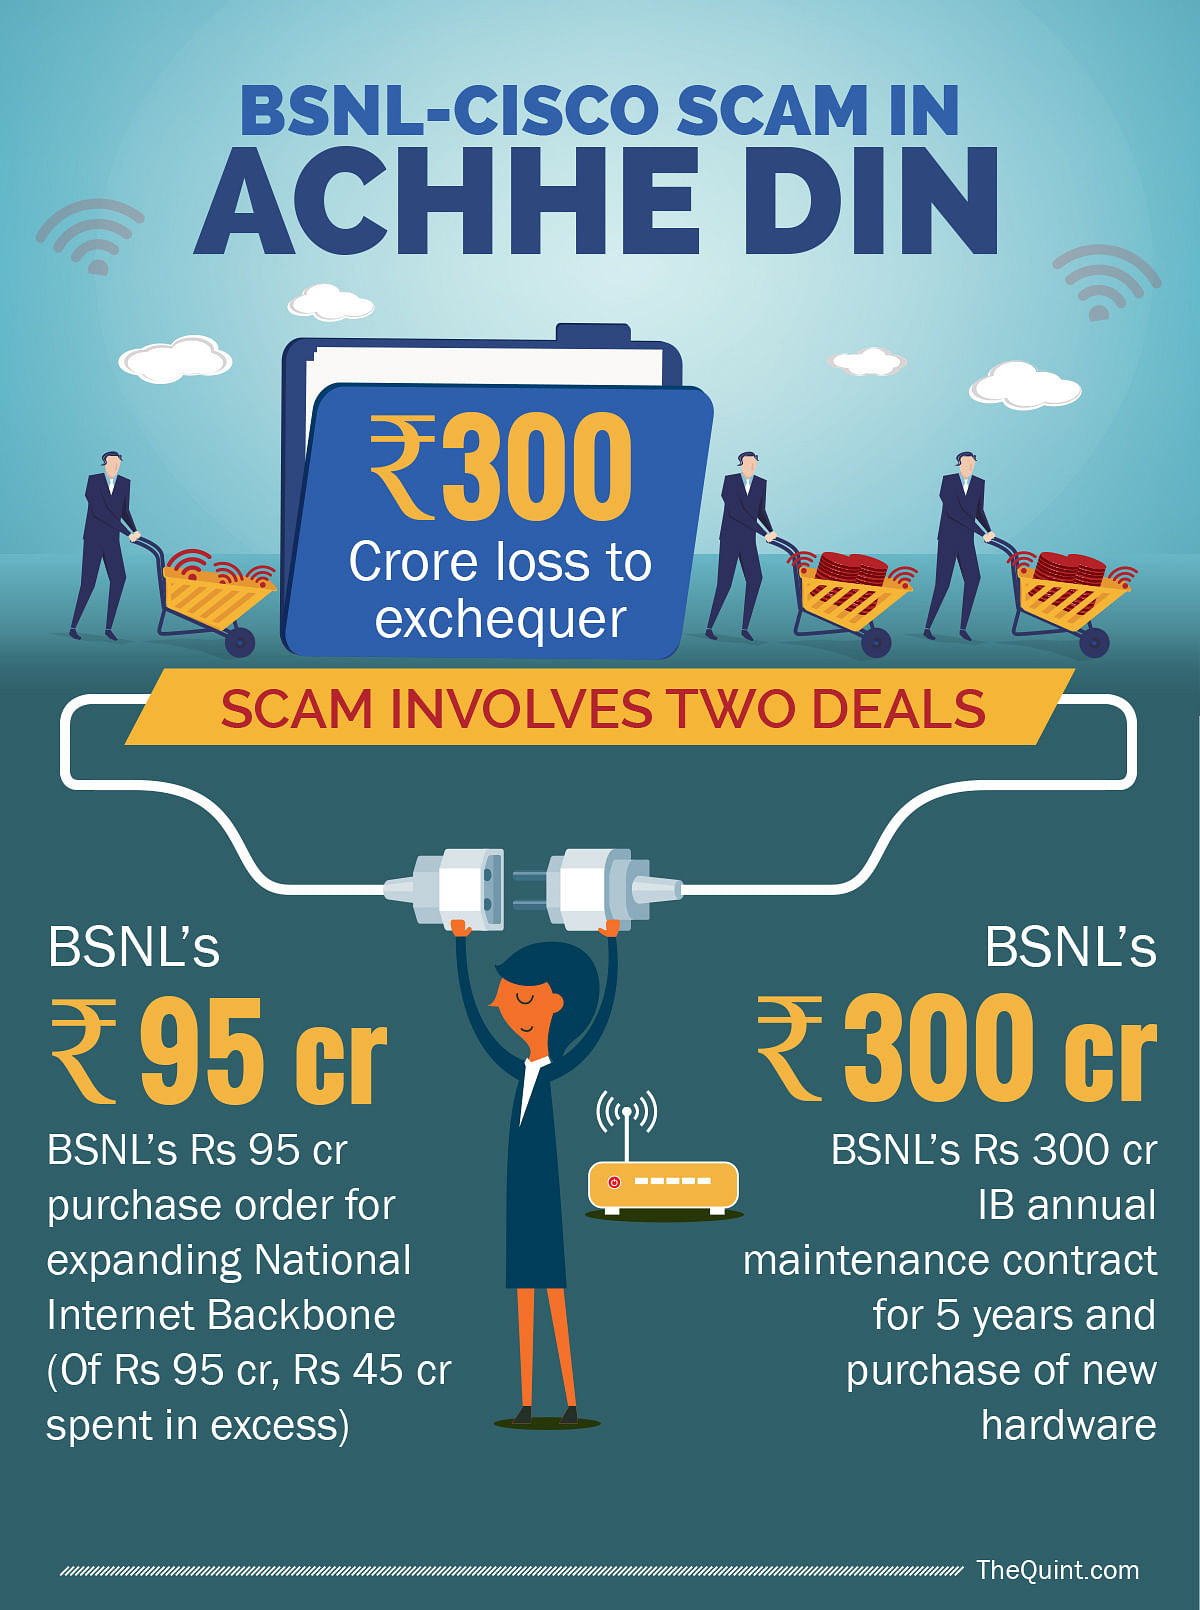  Rs 300-crore BSNL-Cisco scam explodes PM Narendra Modi’s promise of a corruption-free India, reports Chandan Nandy.